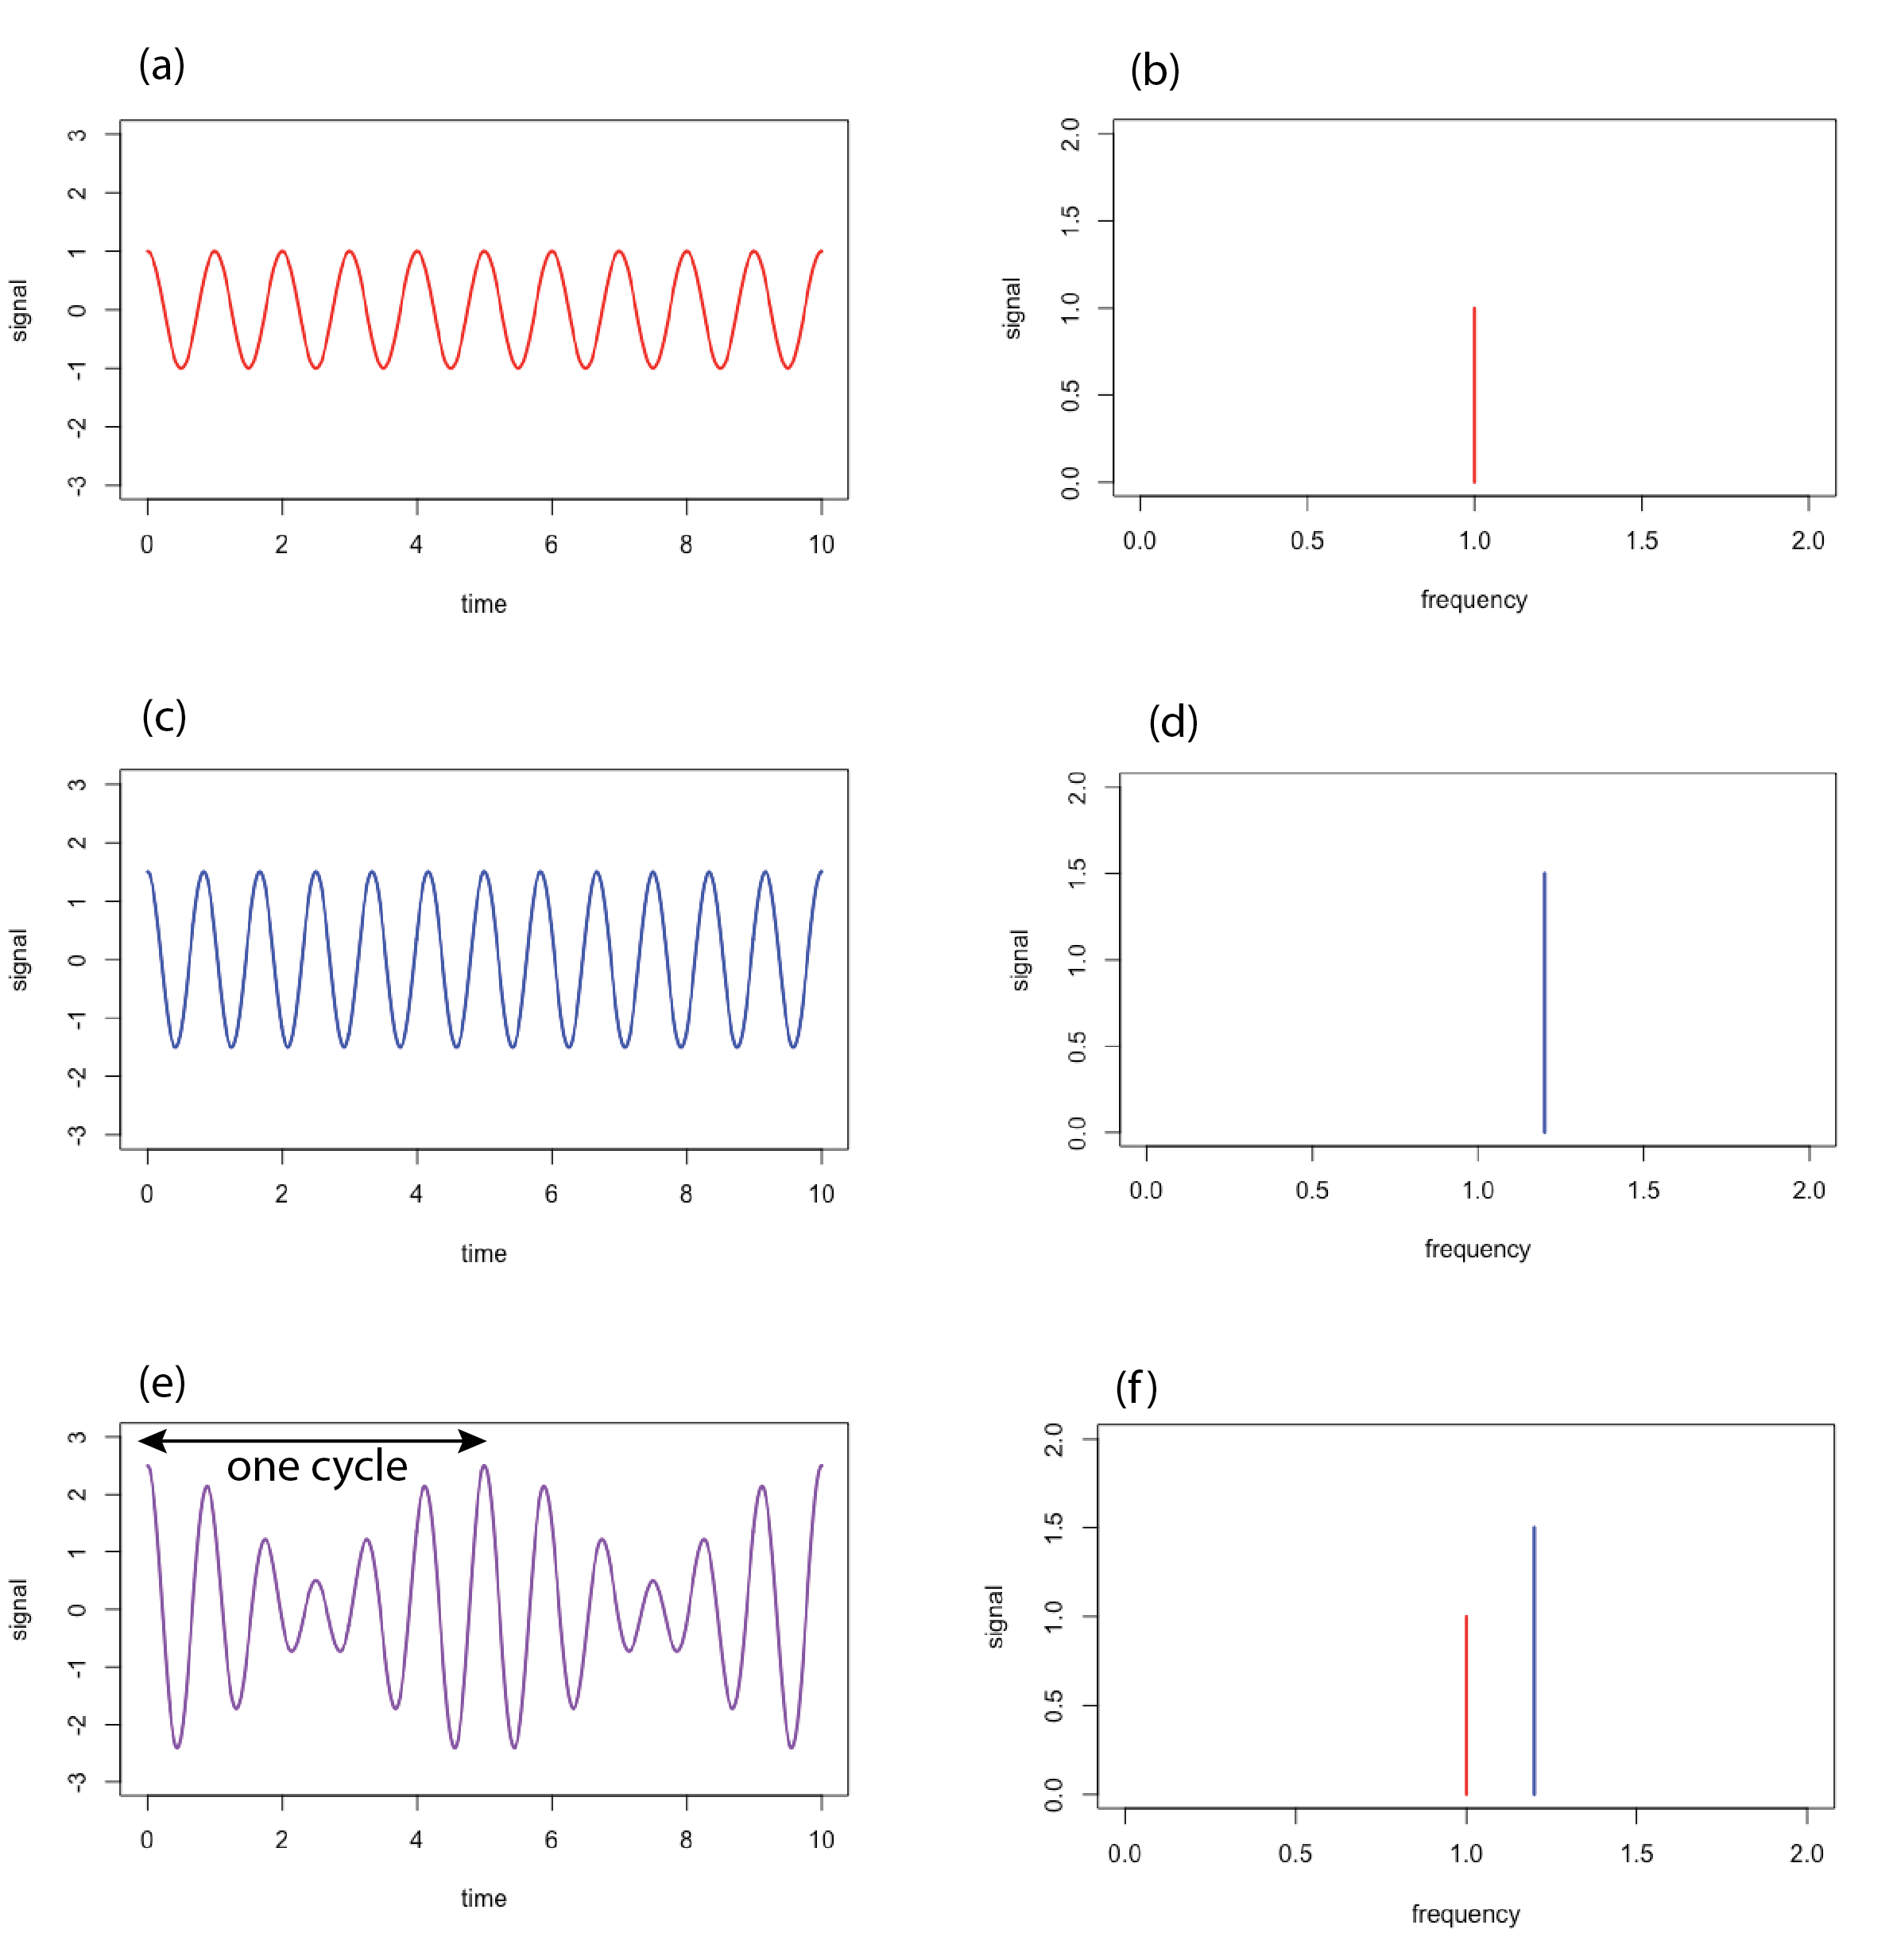 Time domain and frequency domain spectra for monochromatic and polychromatic sources.